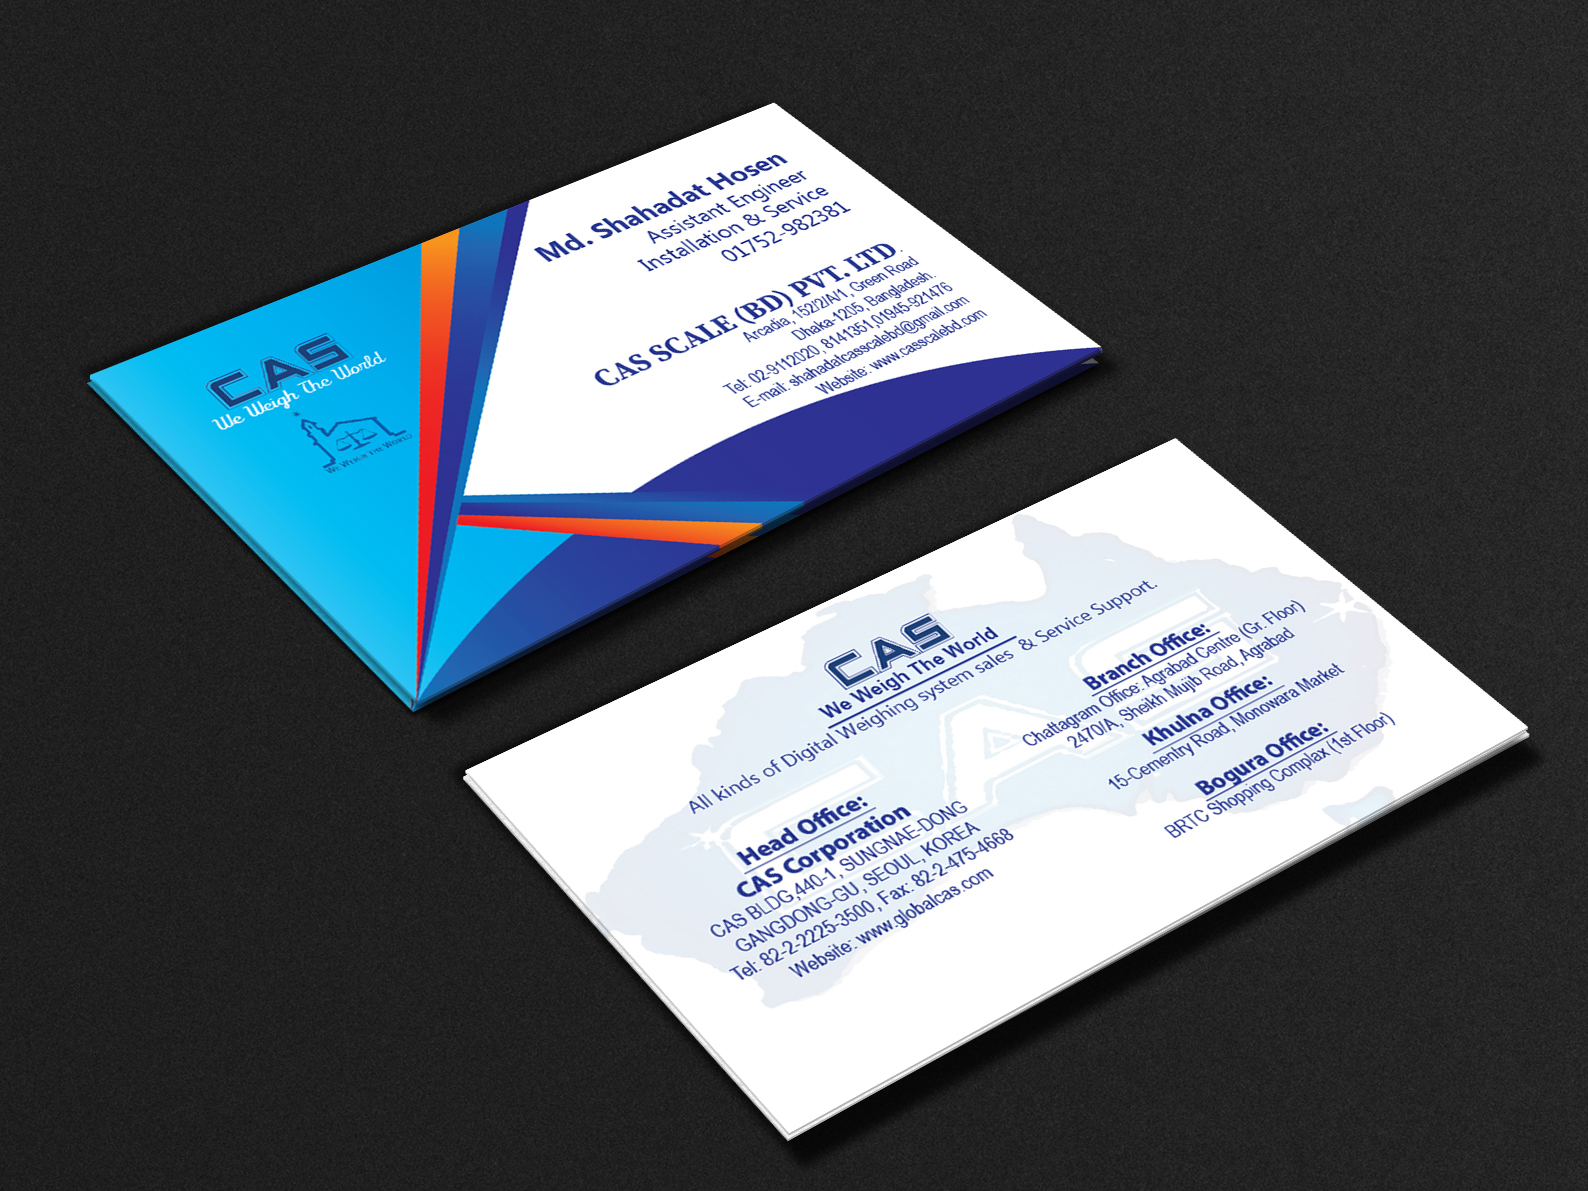 5438I will design professional business flyer in 24 hours